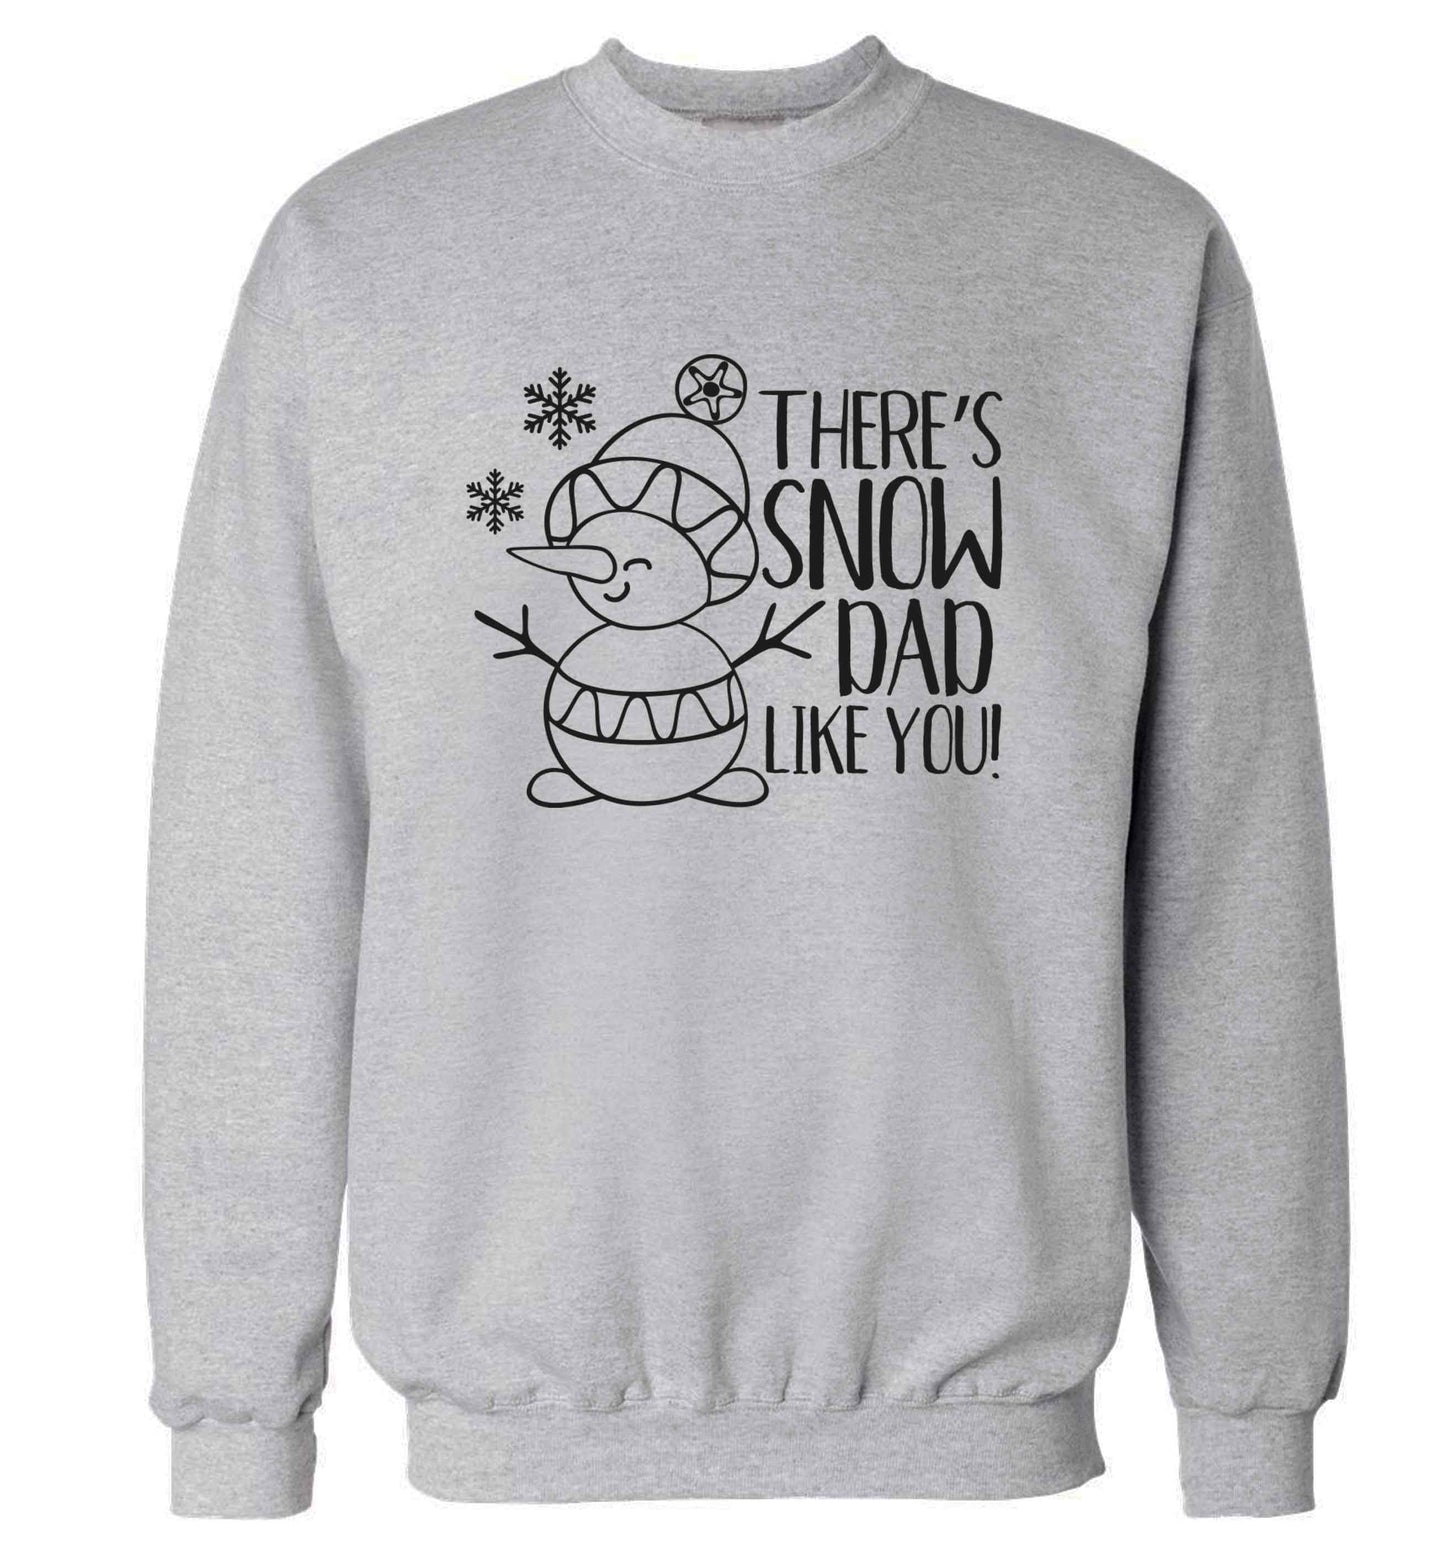 There's snow dad like you adult's unisex grey sweater 2XL